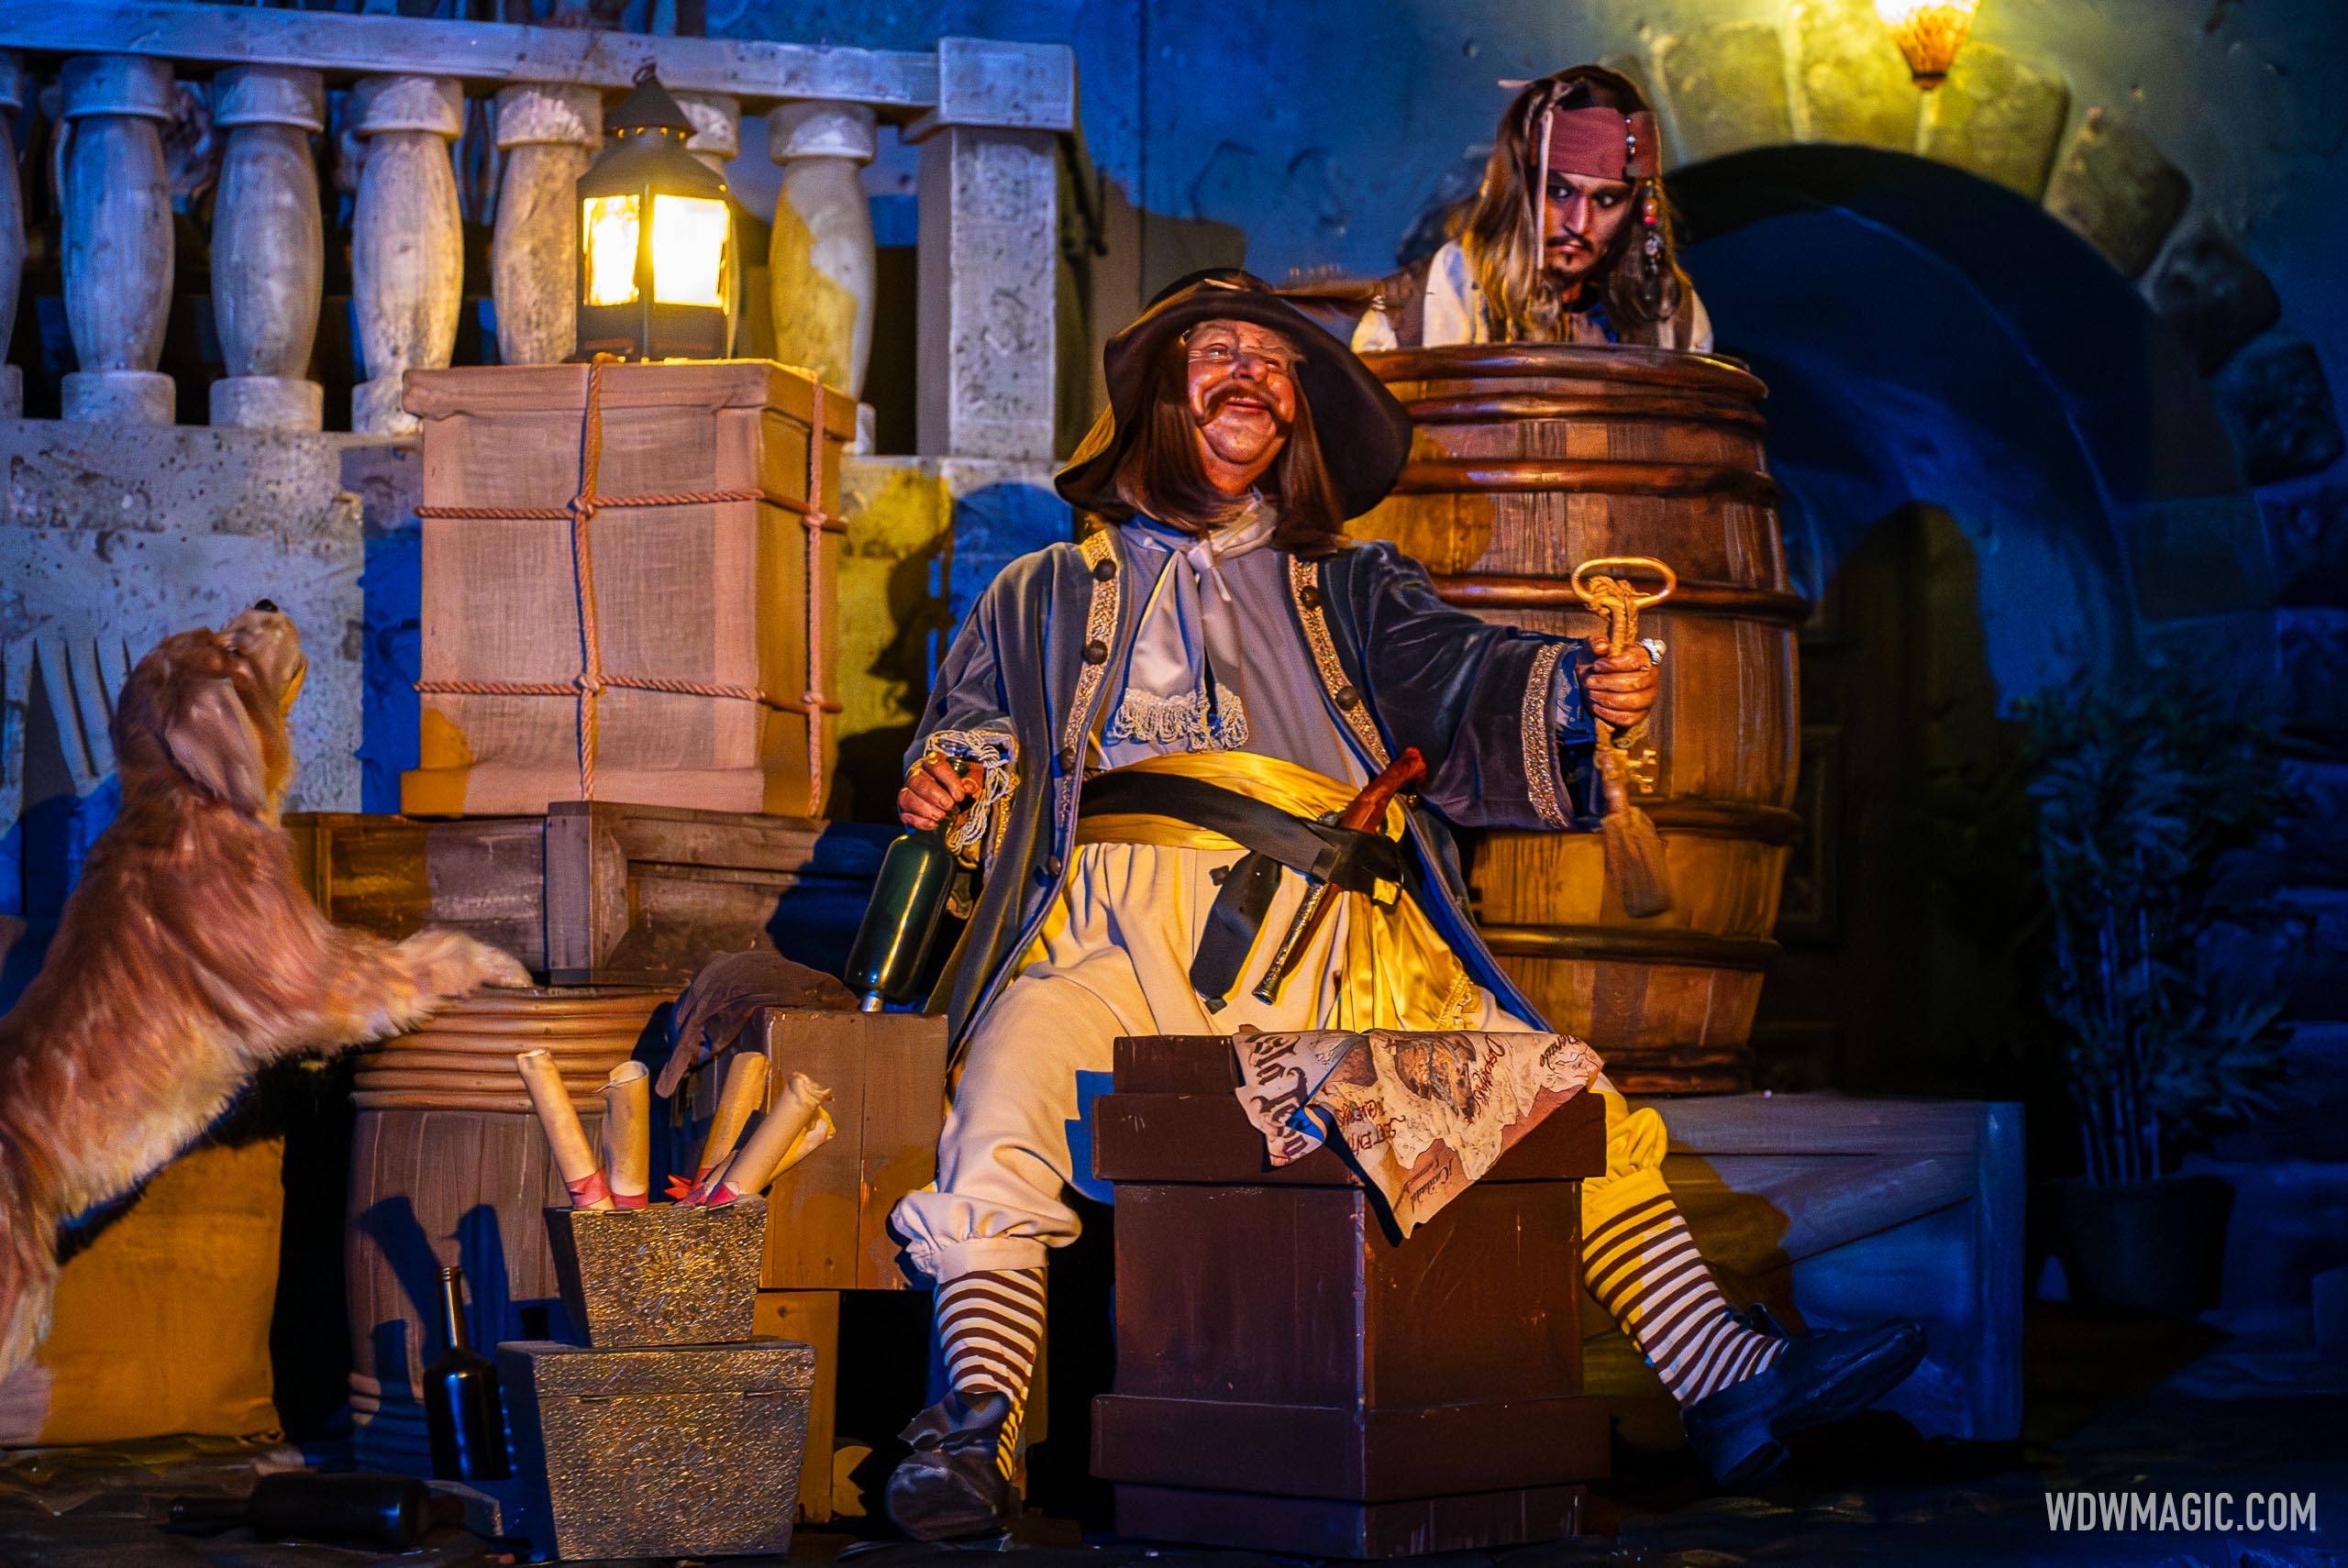 Pirates of the Caribbean closing for refurbishment in February for new auction scene